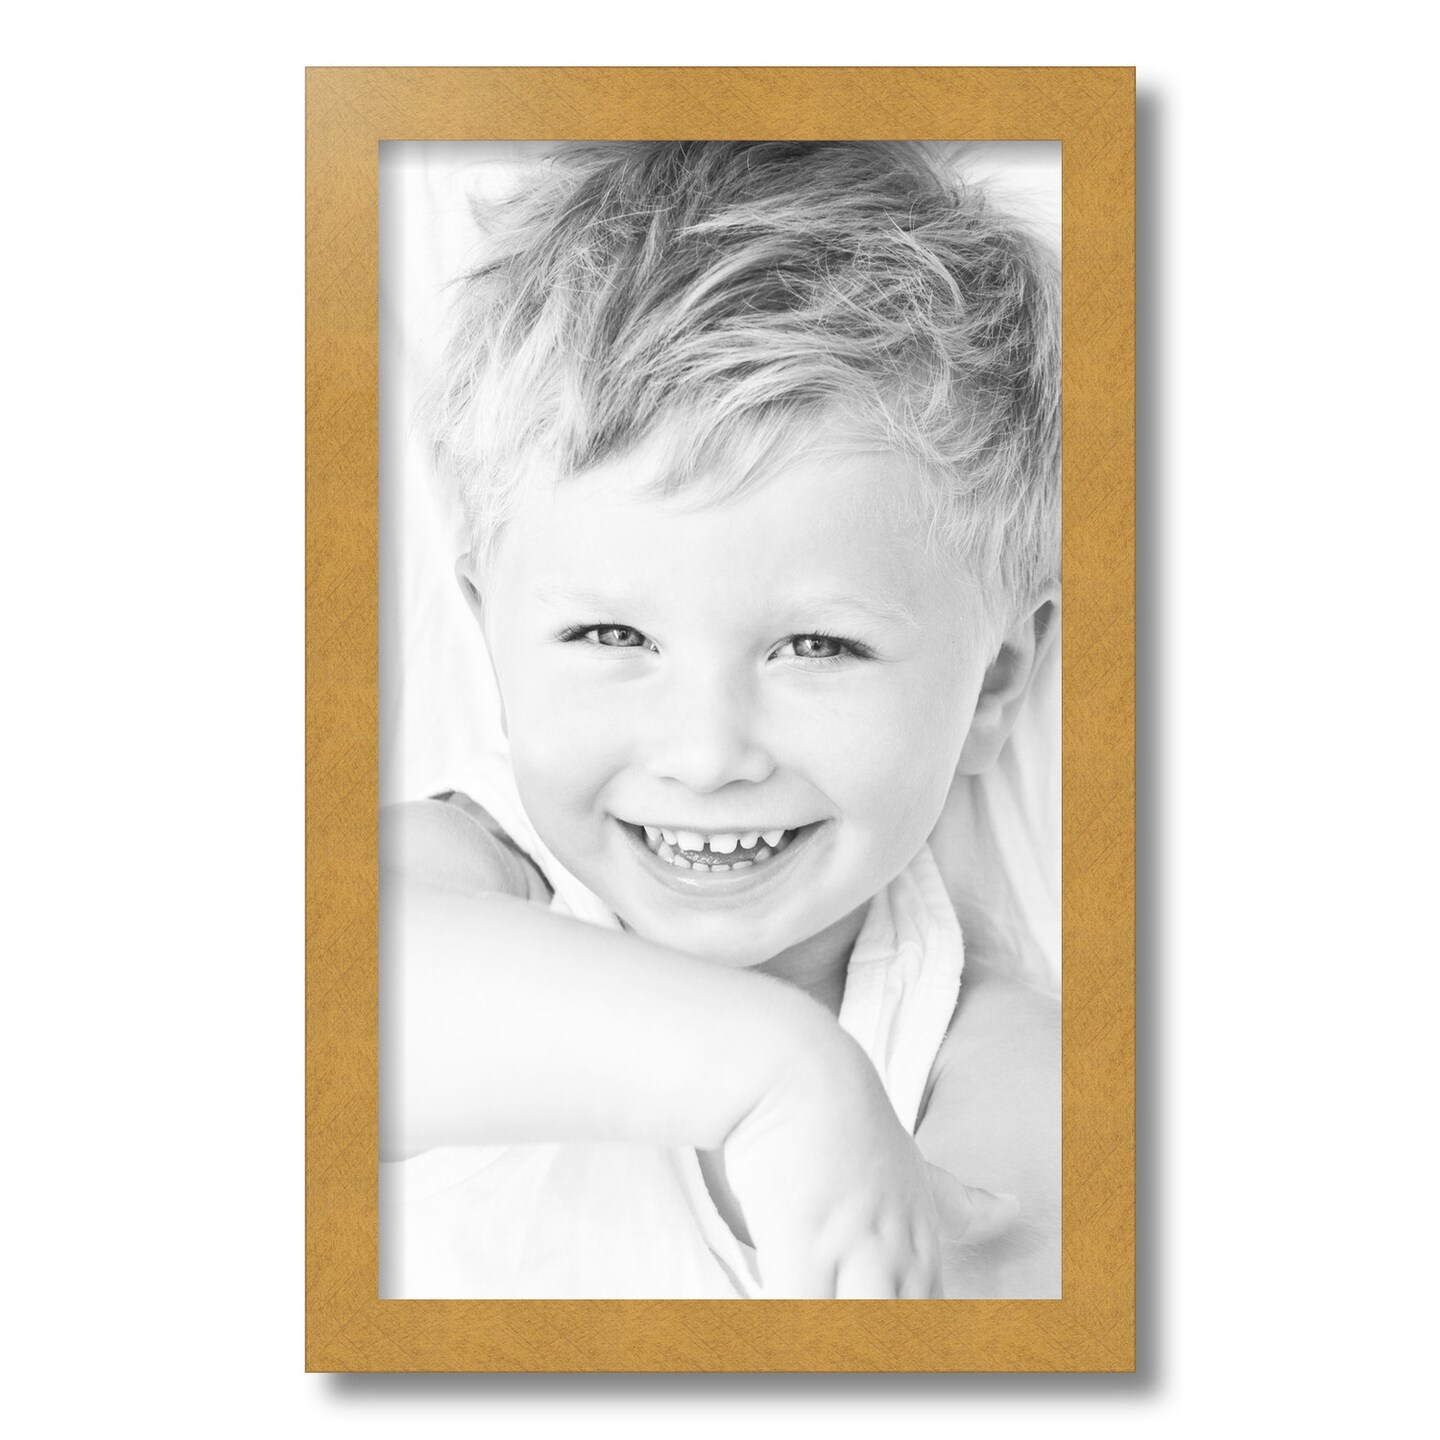 ArtToFrames 12x20 Inch  Picture Frame, This 1.25 Inch Custom MDF Poster Frame is Available in Multiple Colors, Great for Your Art or Photos - Comes with Regular Glass and  Corrugated (A46IK)